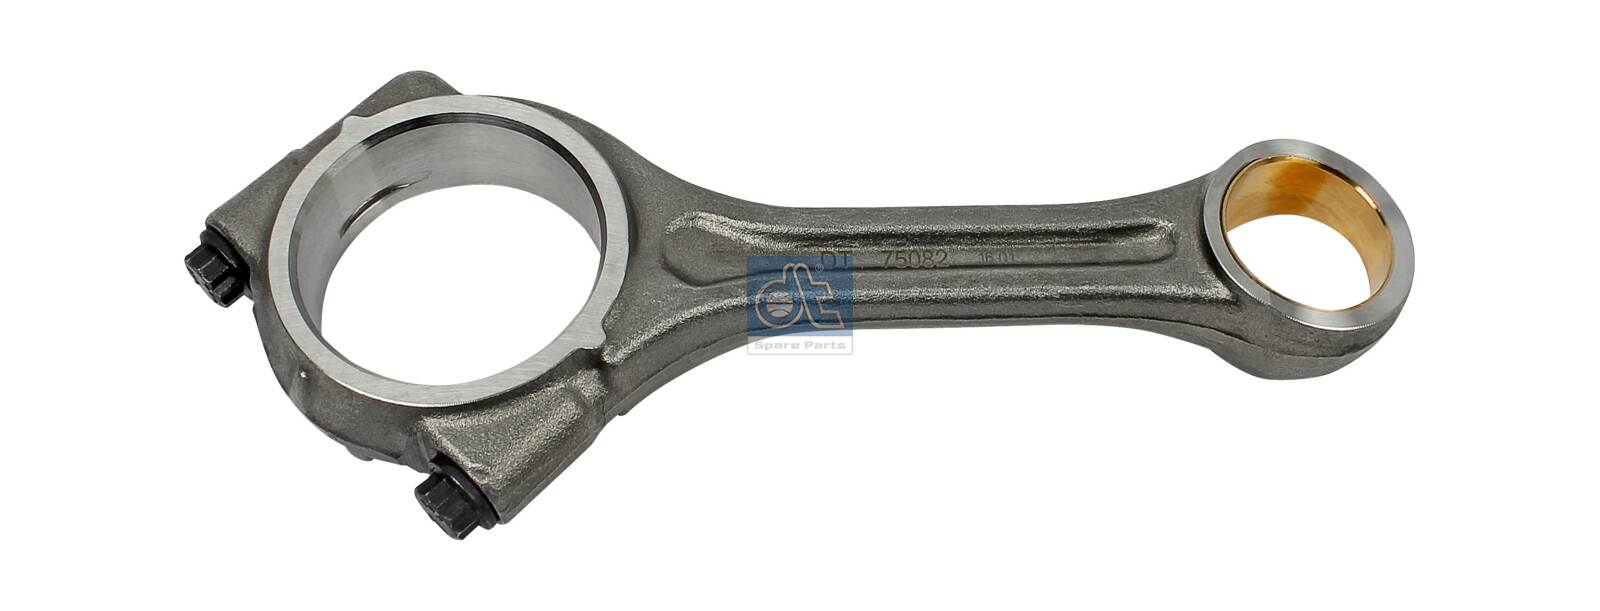 4.61649, Connecting Rod, DT Spare Parts, 9060300820, 9060300920, 9060301520, 9060301720, A9060300820, A9060300920, A9060301520, A9060301720, 010.1201, 102937, 40290, 9060301620